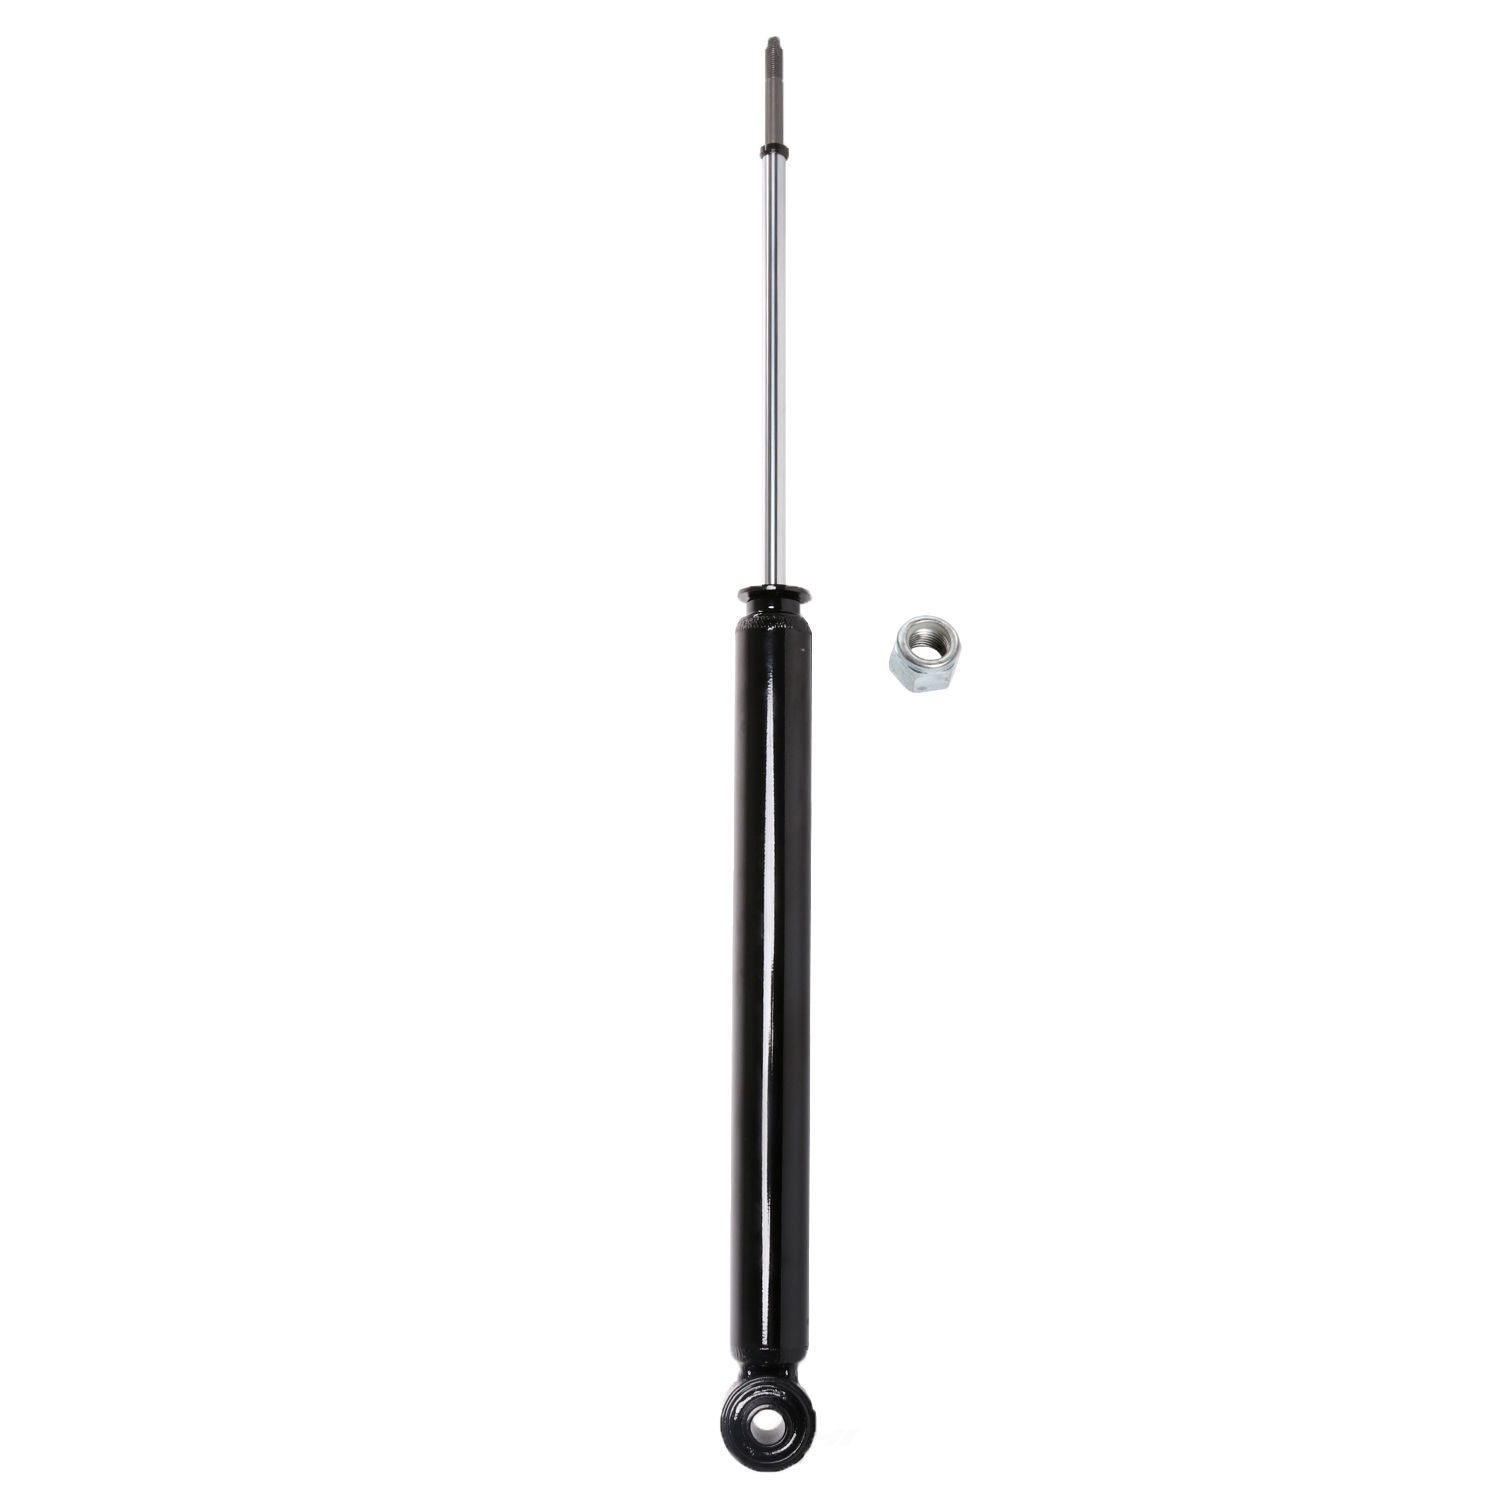 PERFORMANCE RIDE TECHNOLOGY BY ADD - Suspension Strut - P6T 372304